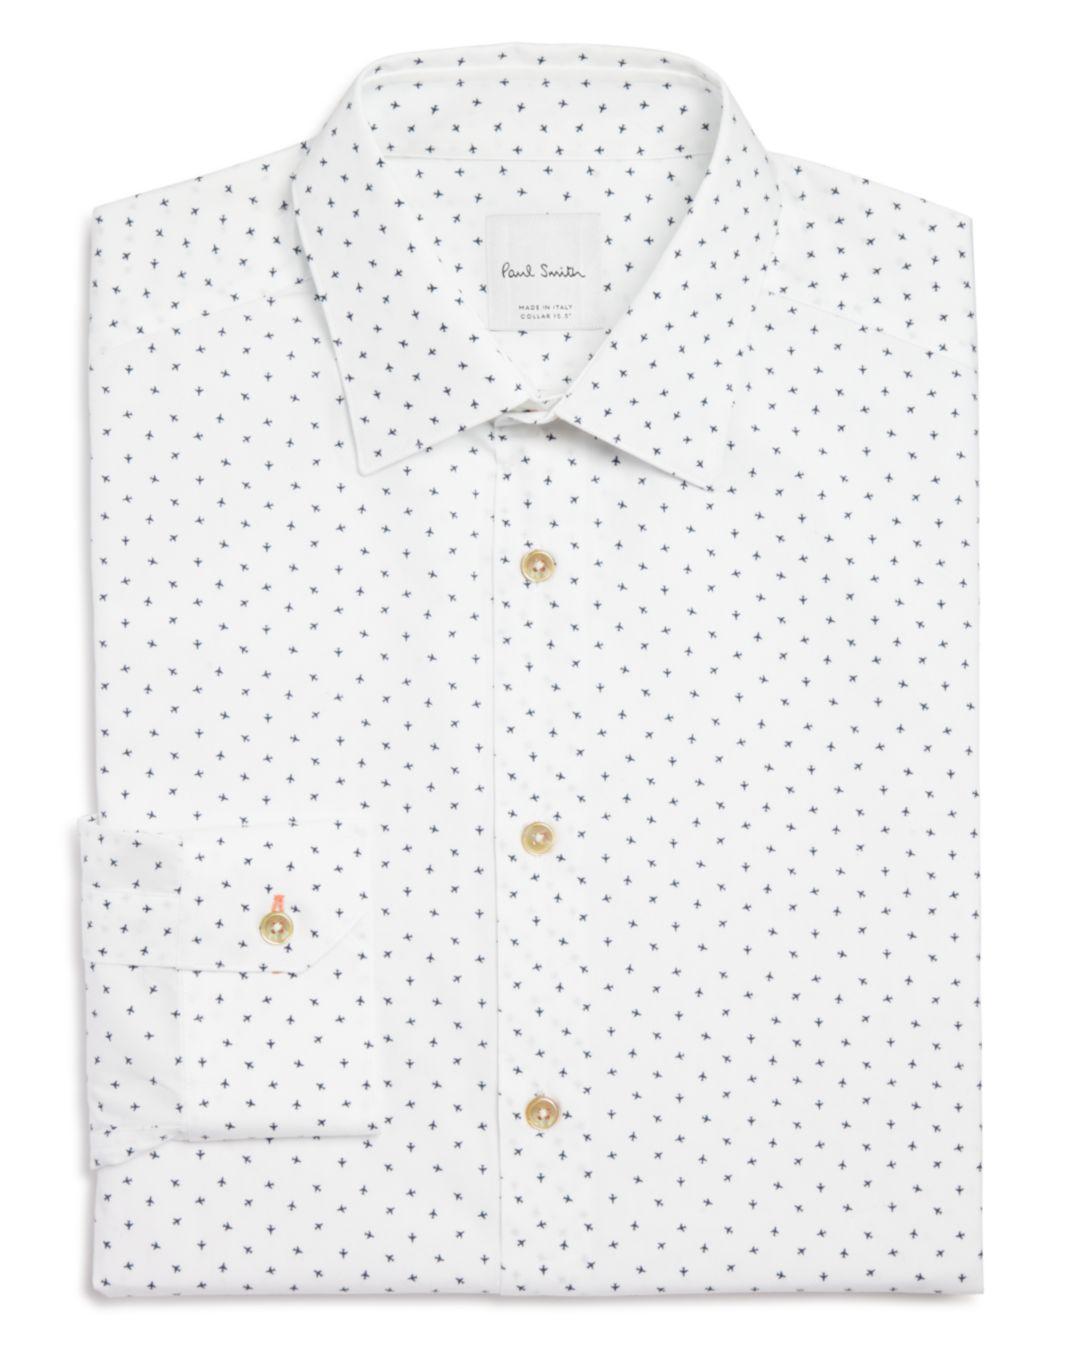 forstene Premonition Betsy Trotwood Paul Smith Airplane Print Slim Fit Dress Shirt in White for Men | Lyst